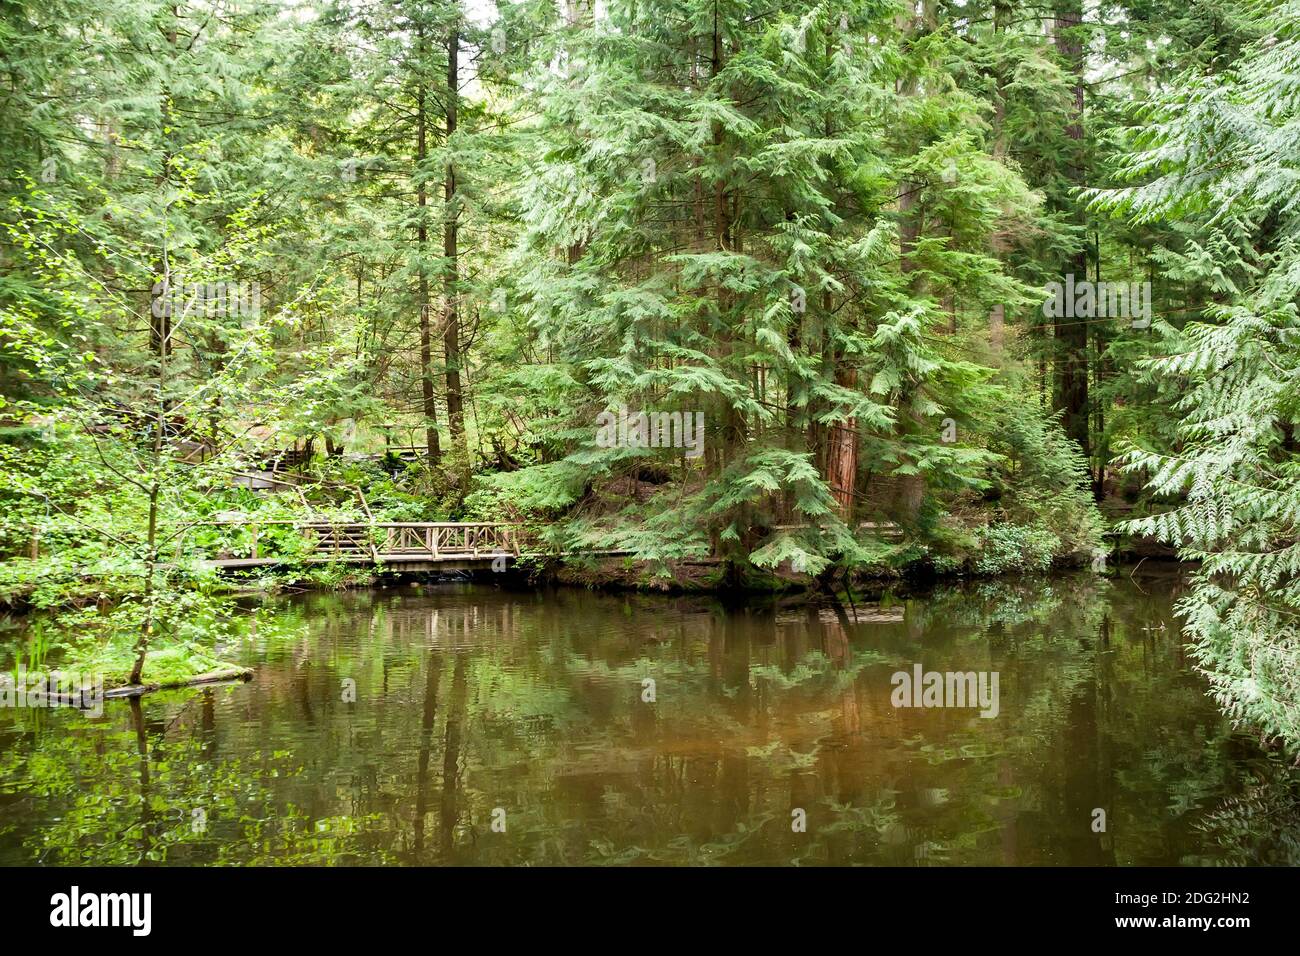 A view of old-growth forest across a pond at Capilano Suspension Bridge Park, North Vancouver, British Columbia, Canada Stock Photo